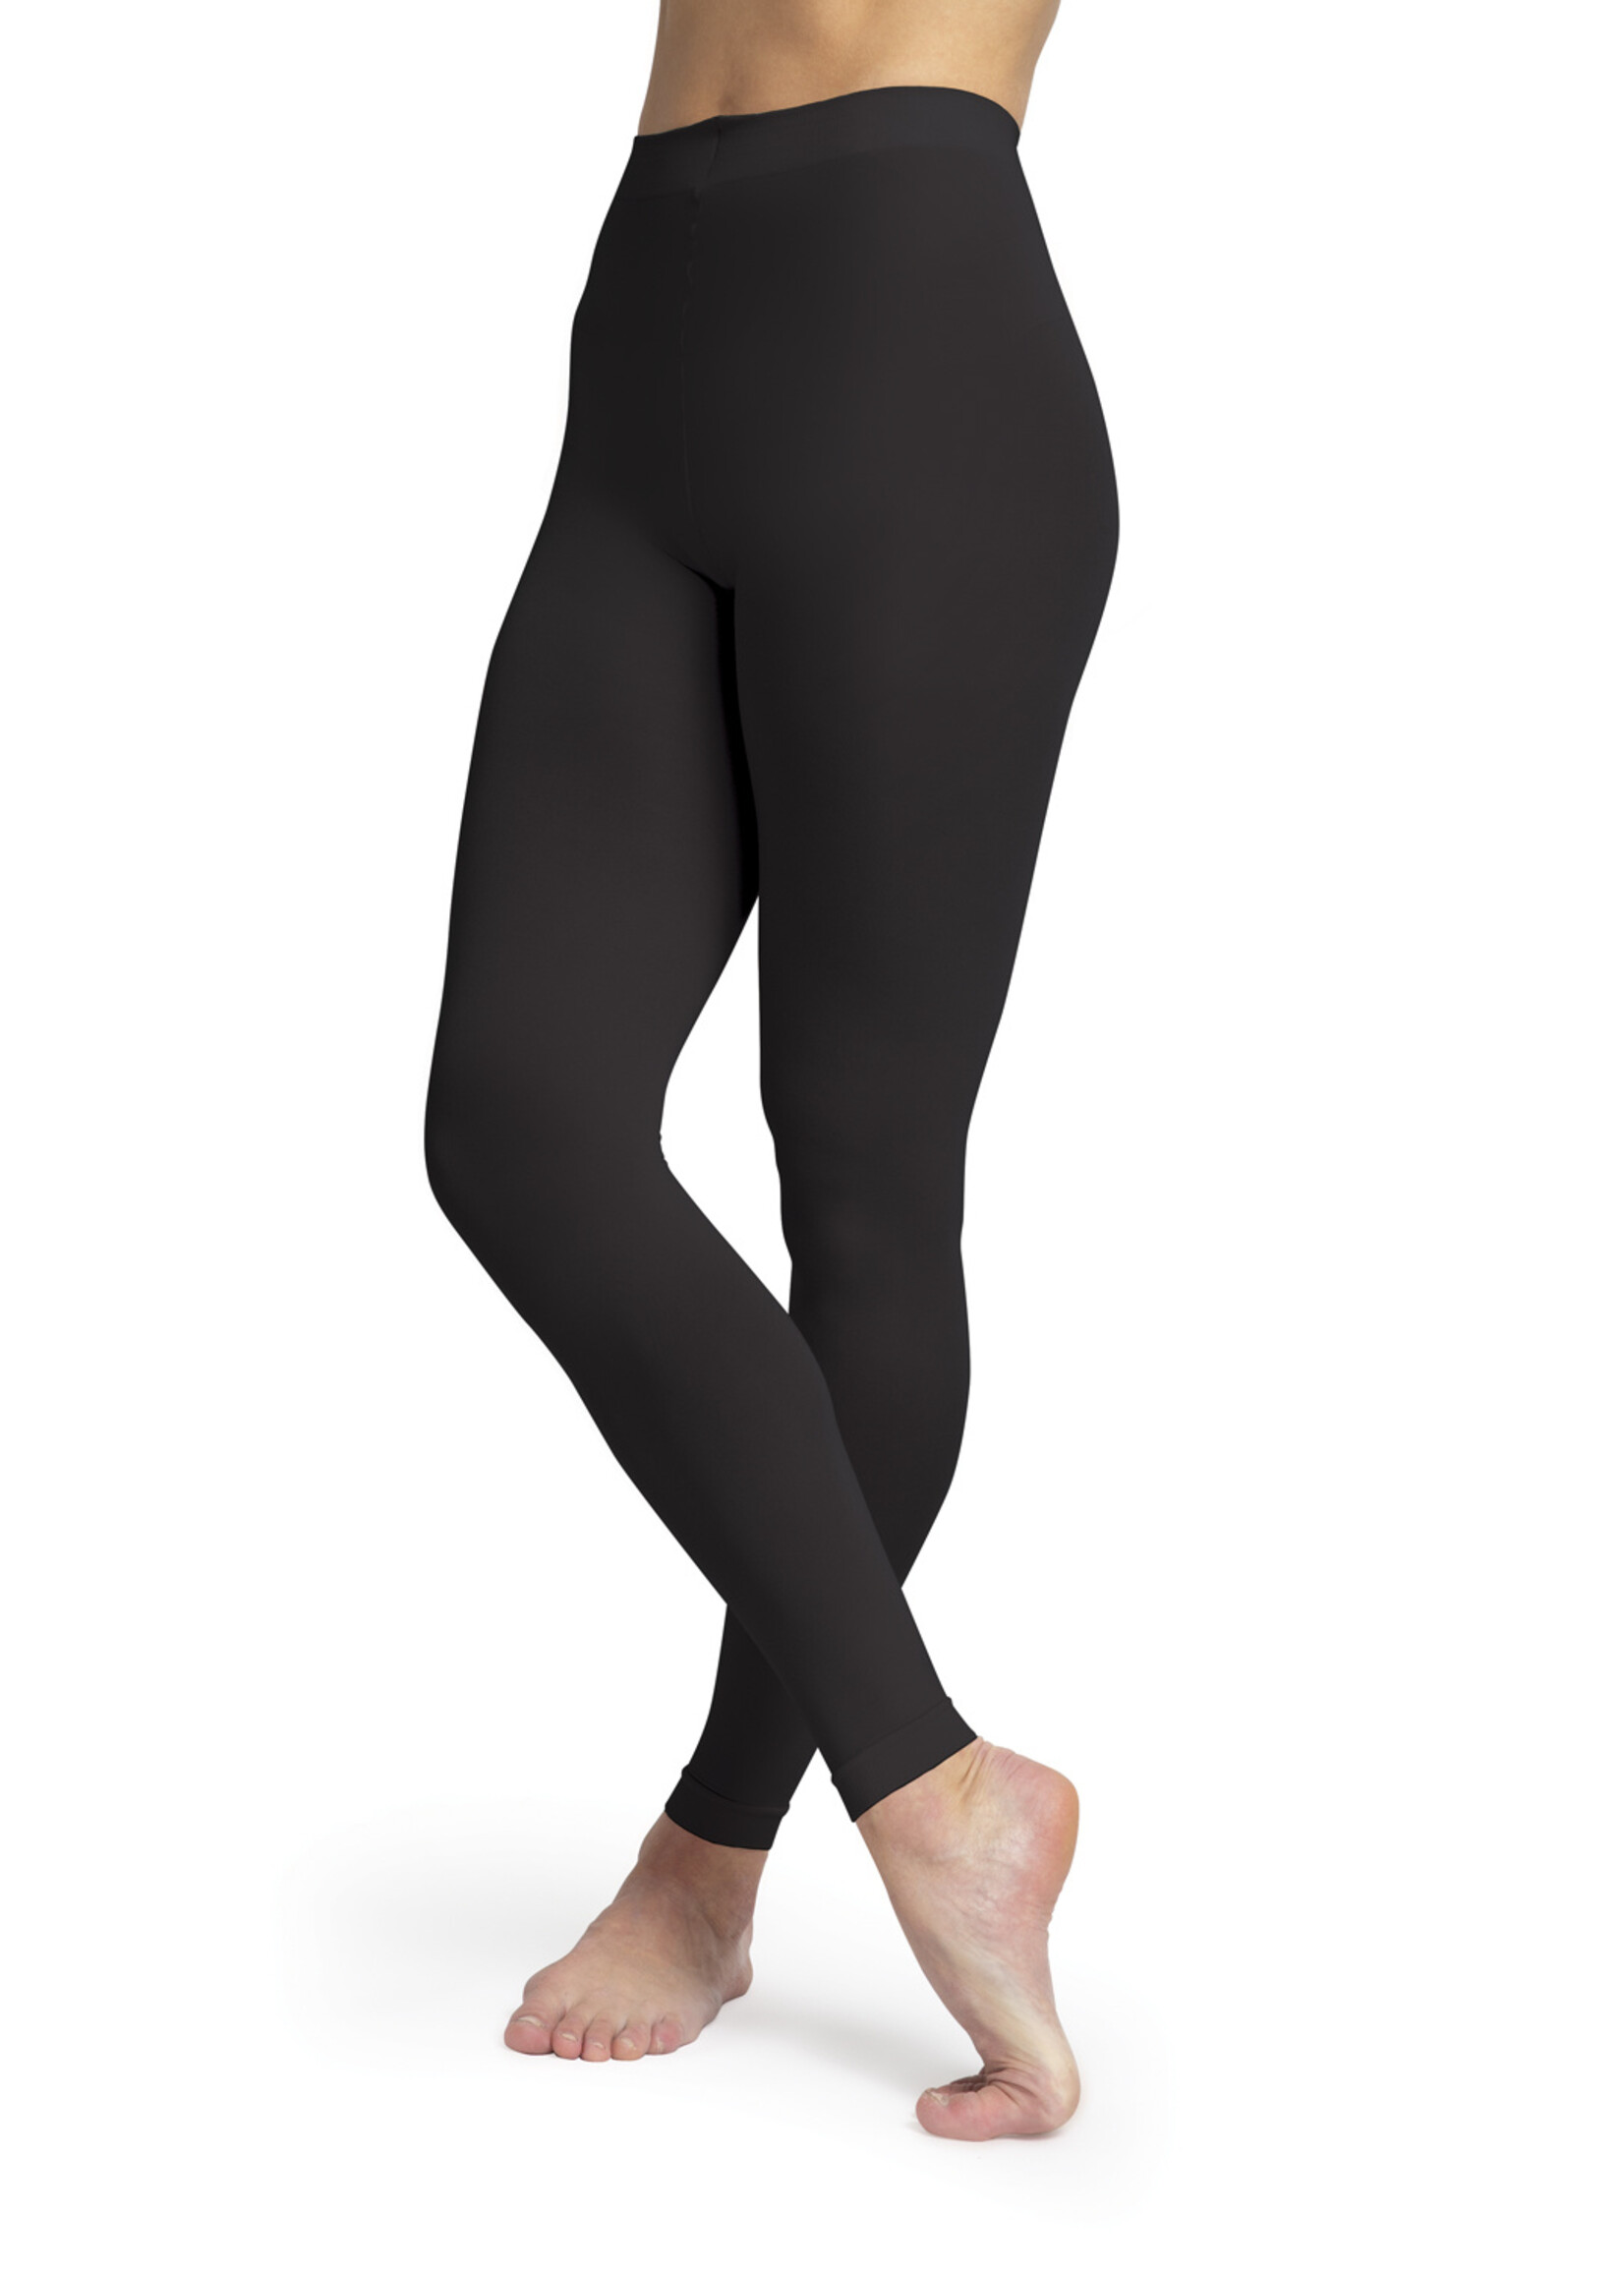 Bloch T0985L Ladies Contoursoft Footless Tight